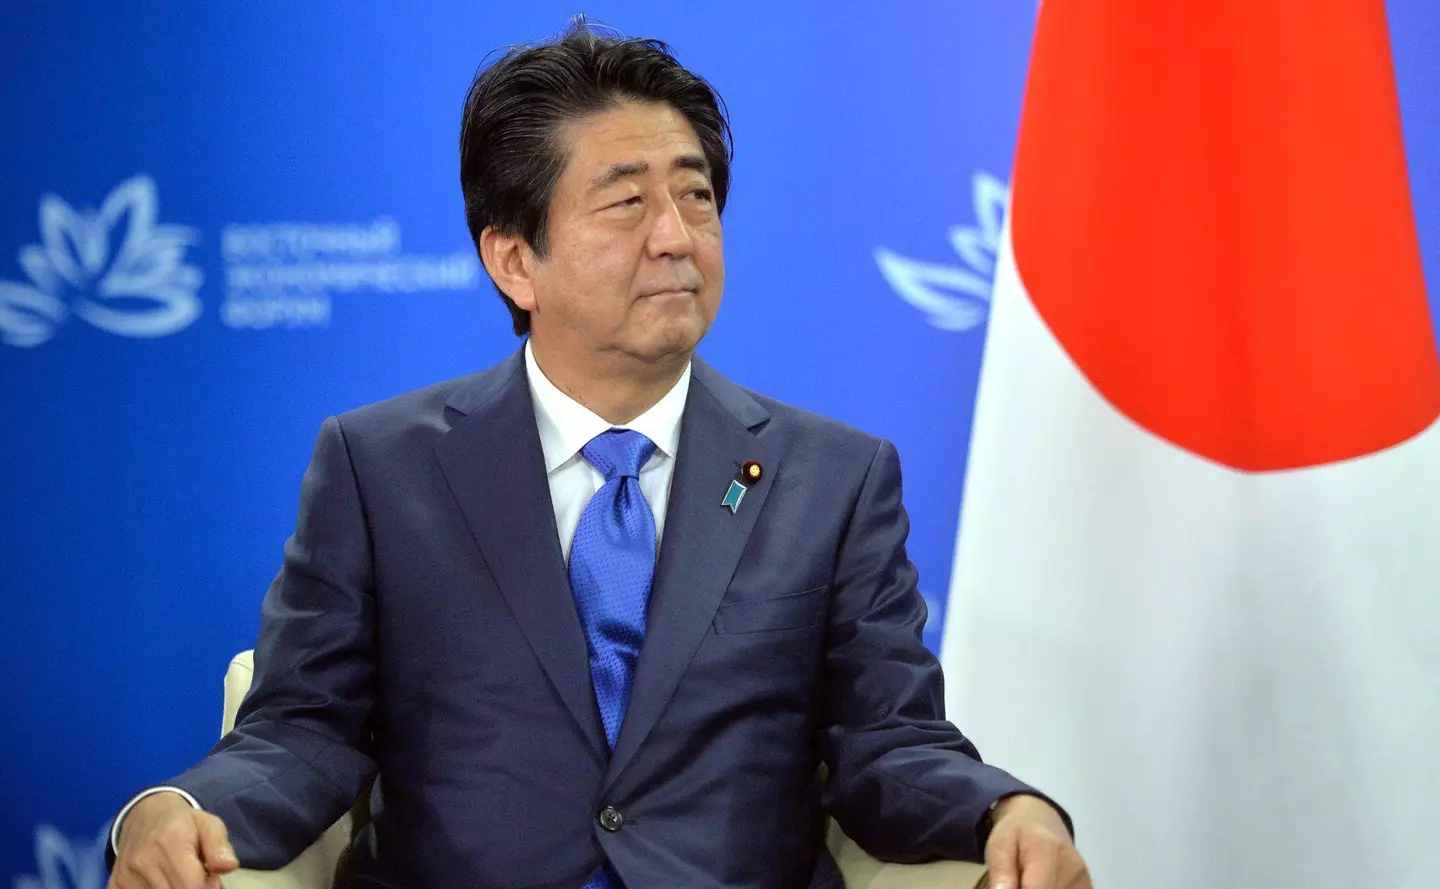 Former Japanese prime minister Shinzo Abe was shot dead while giving a speech.